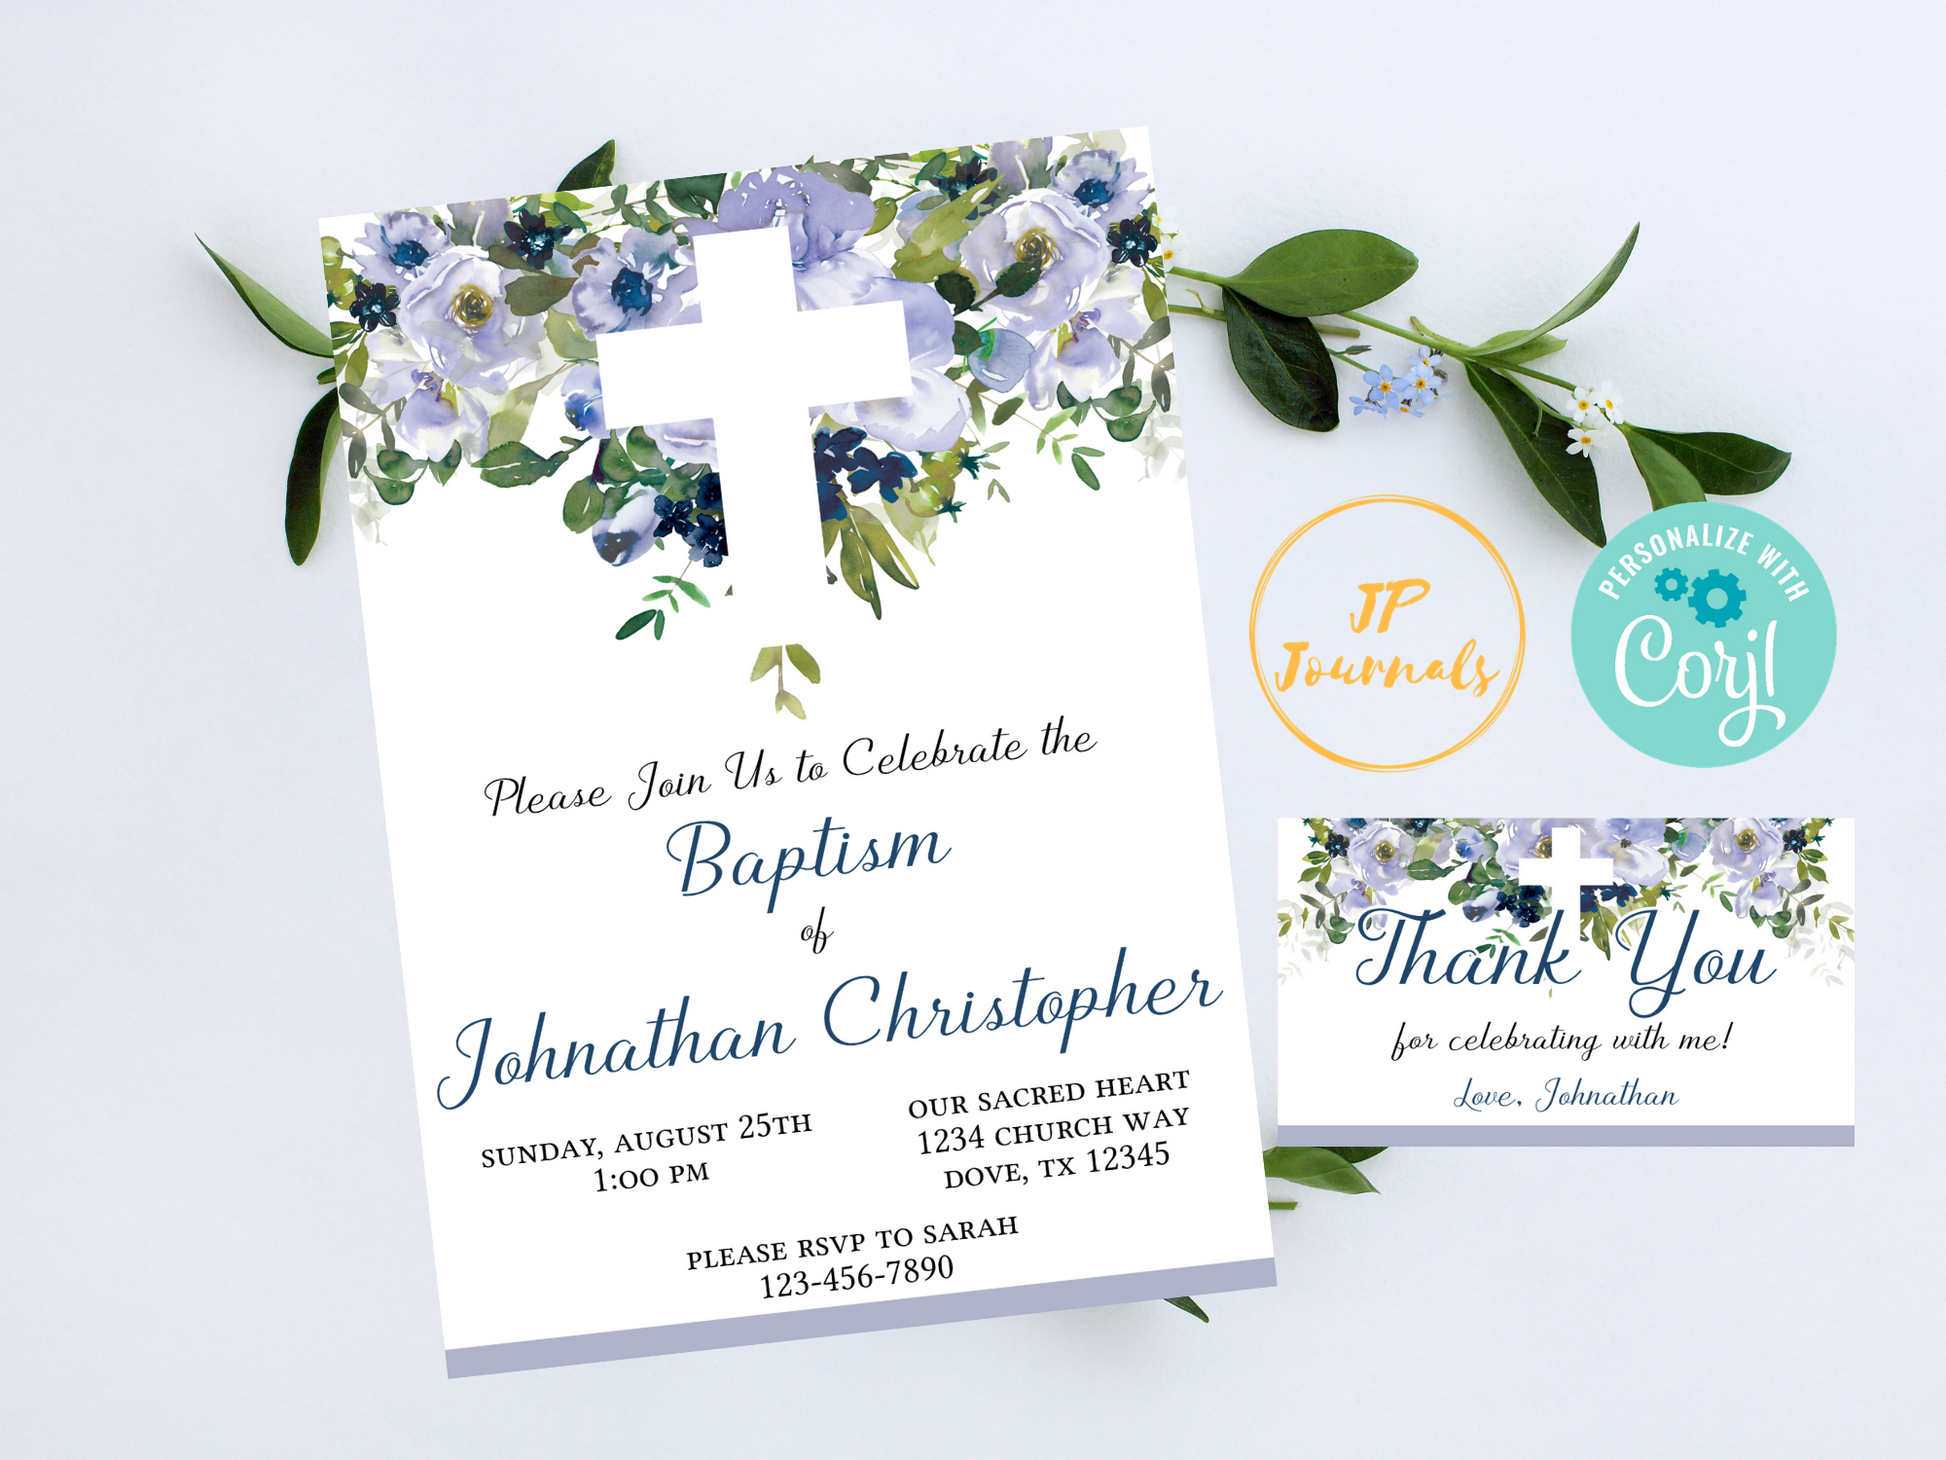 Baby Boy Baptism Invitation - Blue and White Watercolor Flowers